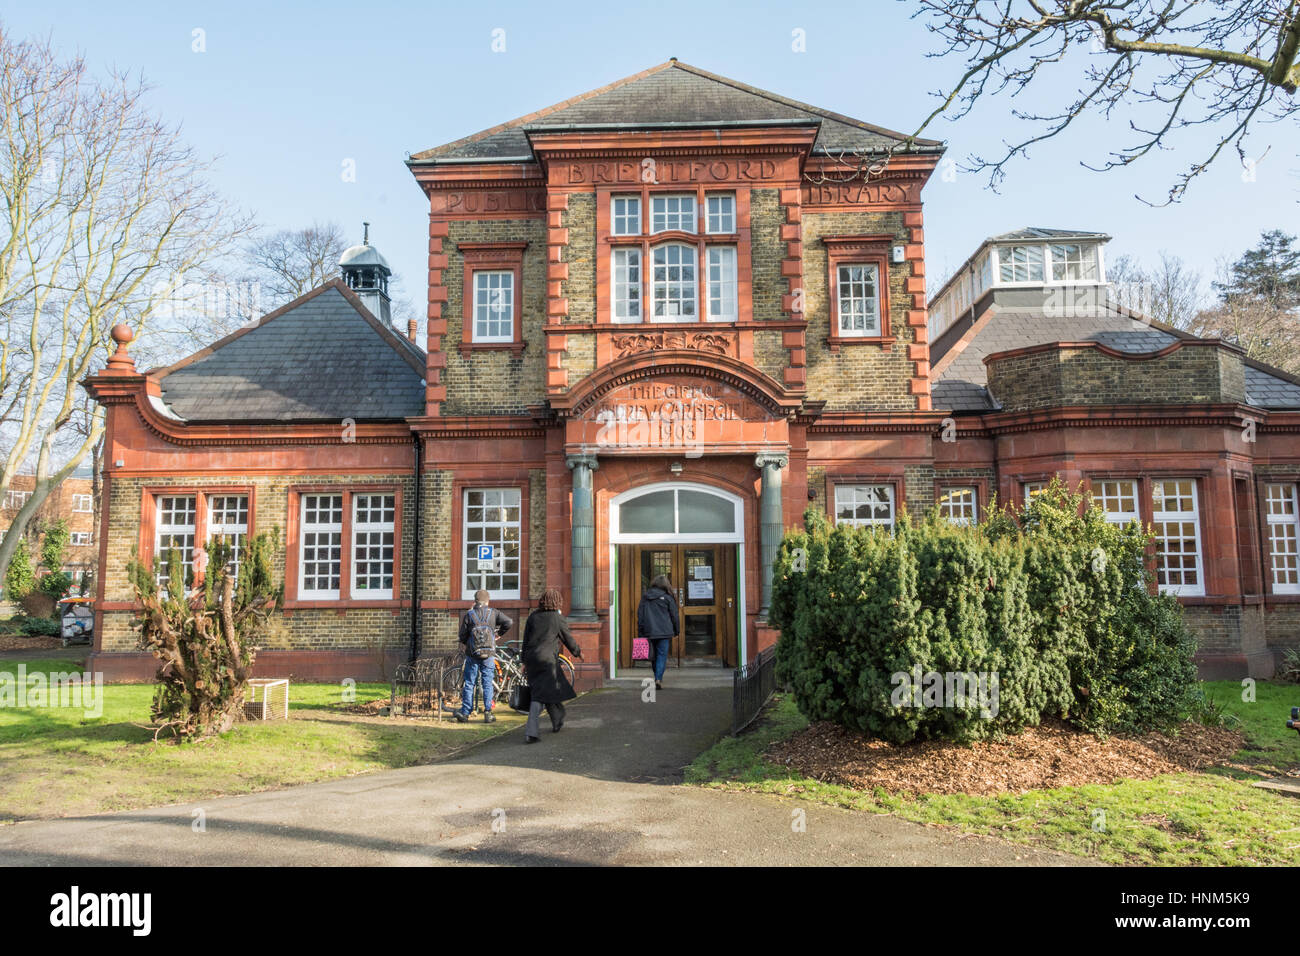 Brentford Library is a Grade II listed building at Boston Manor Road, Brentford, London. Stock Photo